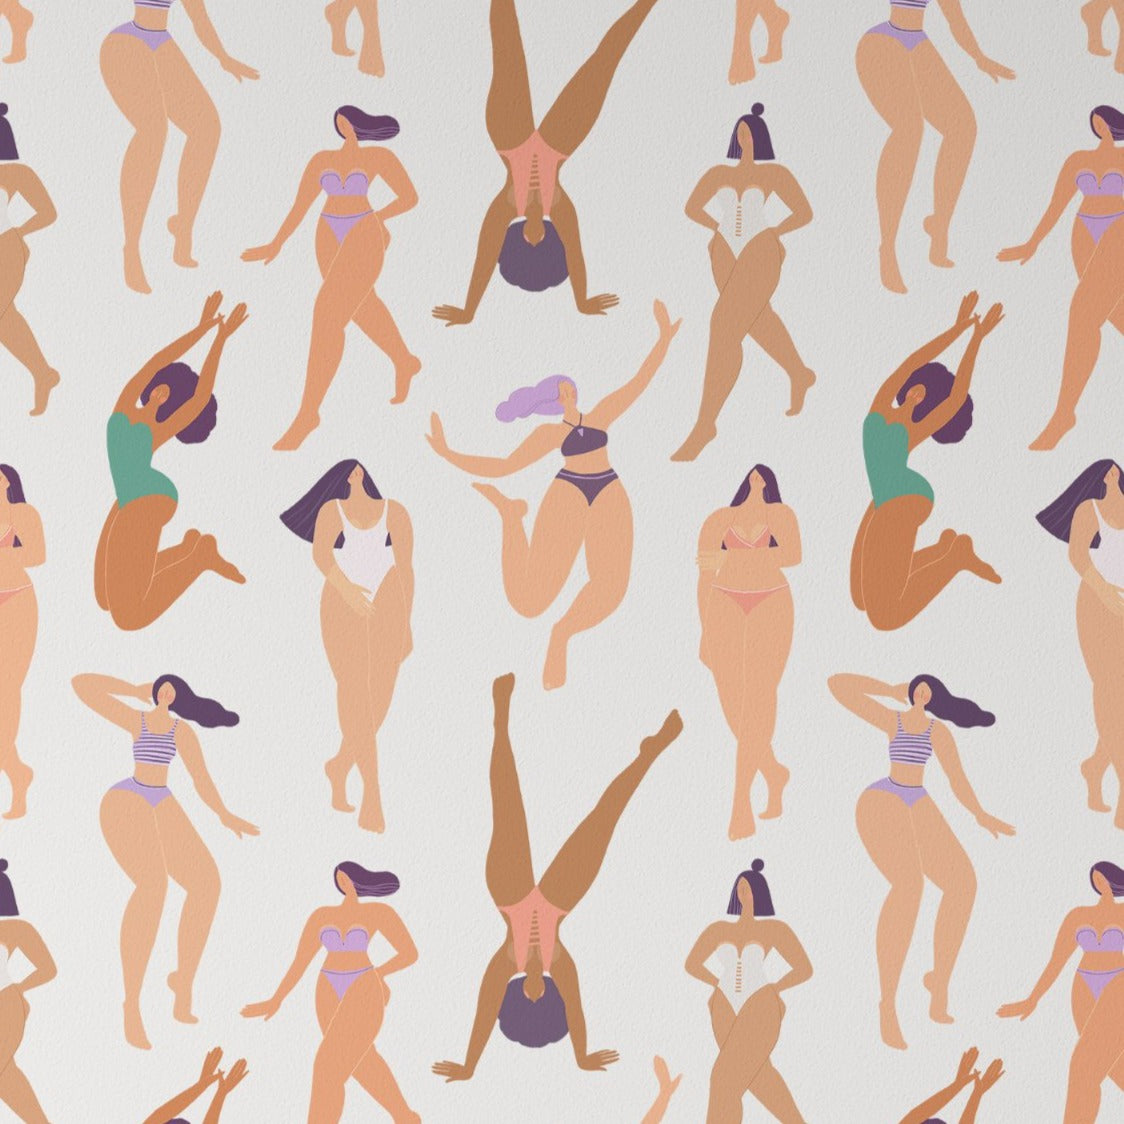 Close-up of Girls in Paradise Wallpaper II showing diverse women in yoga and dance poses